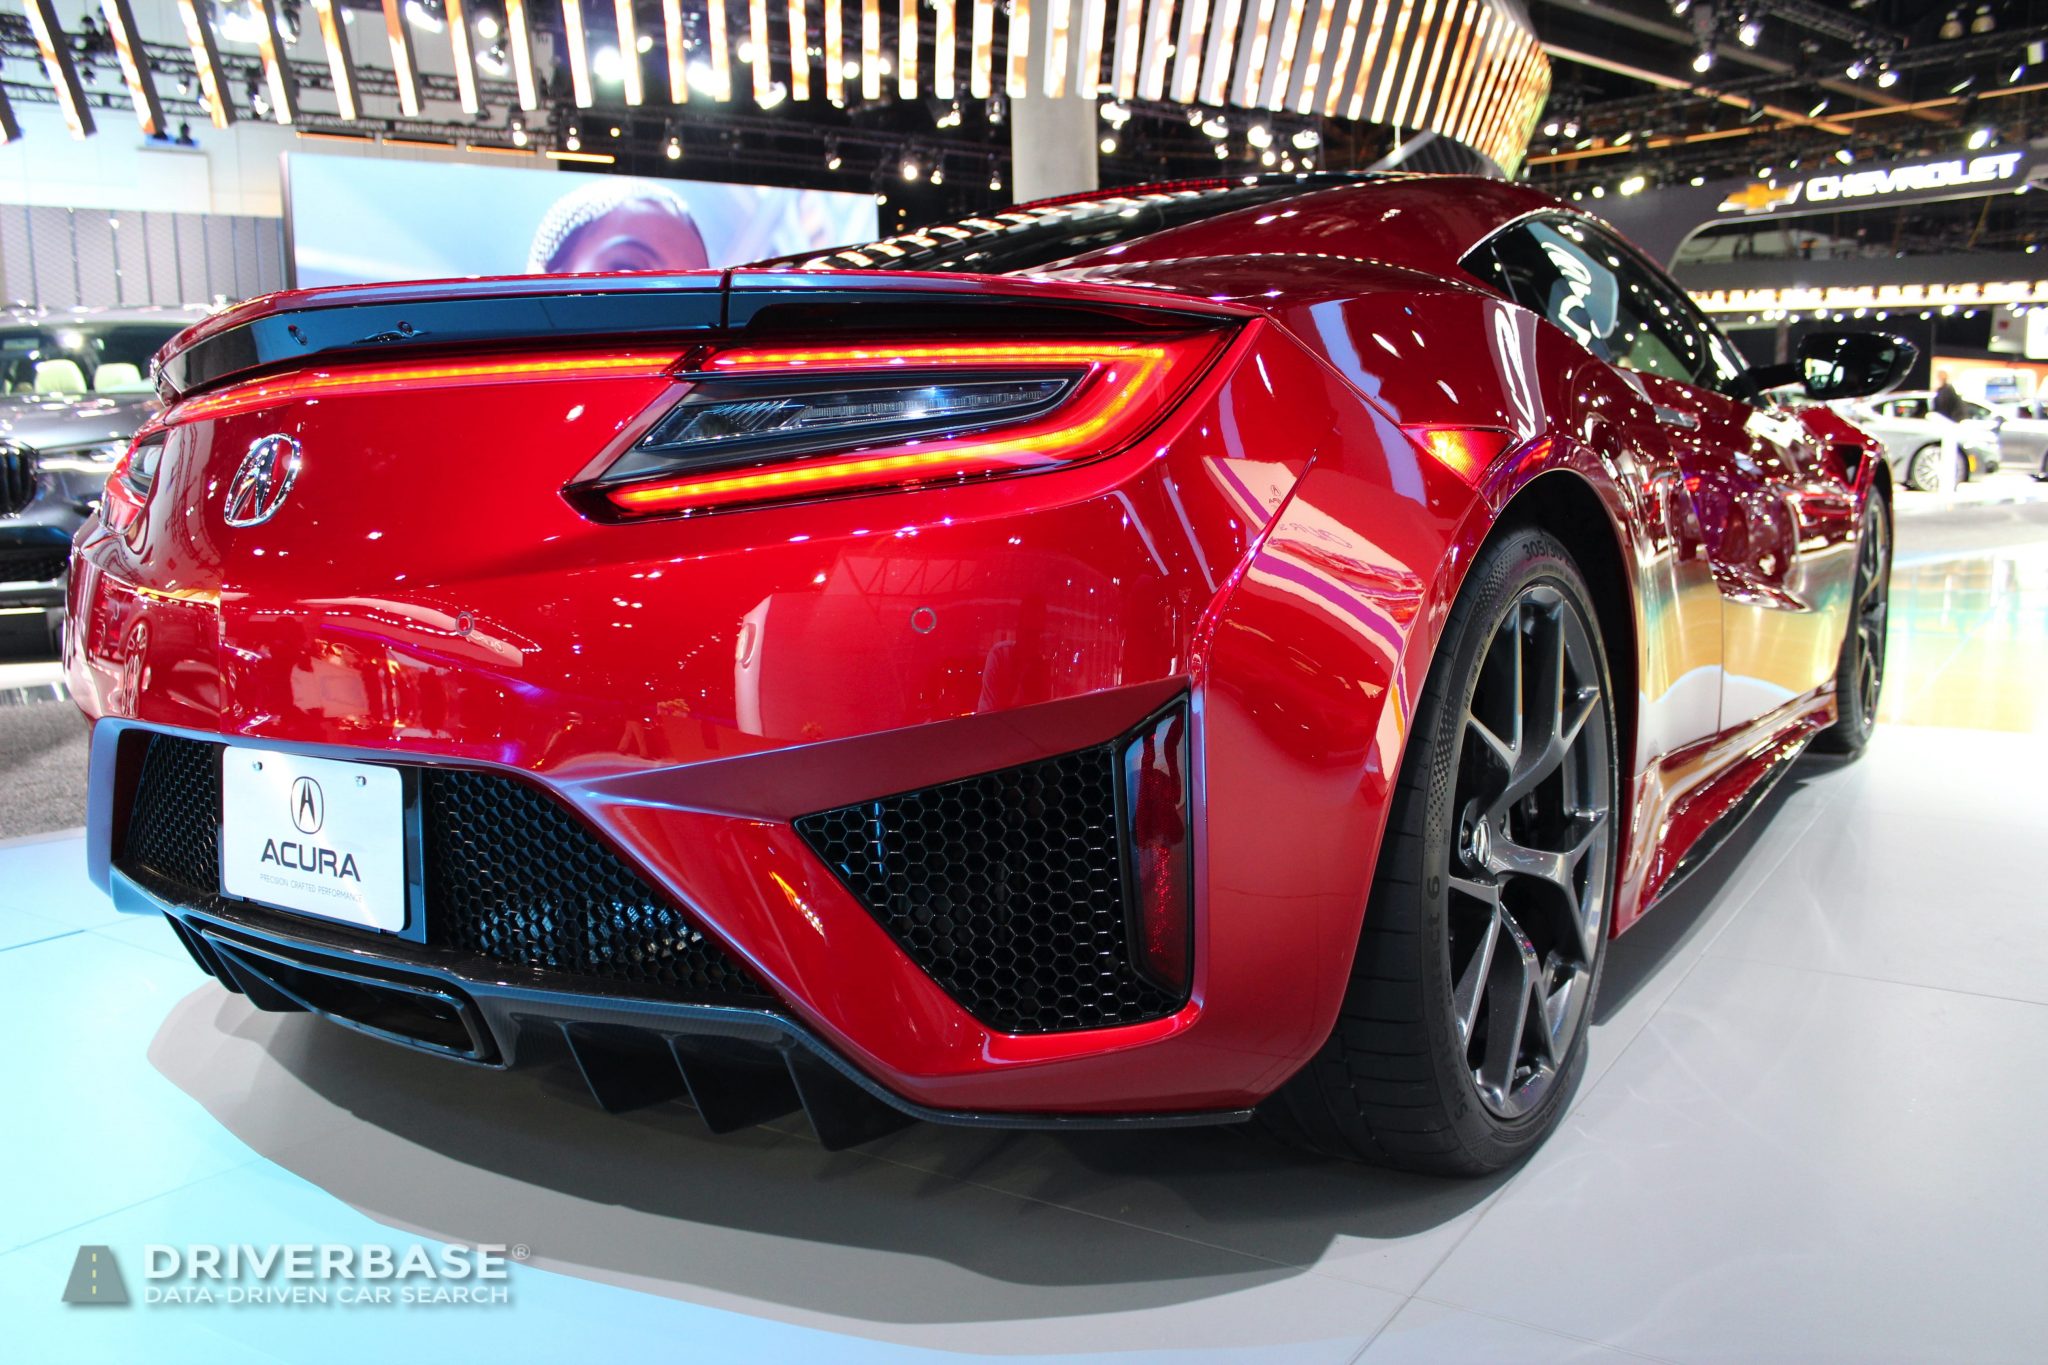 2020 Acura NSX at the 2019 Los Angeles Auto Show